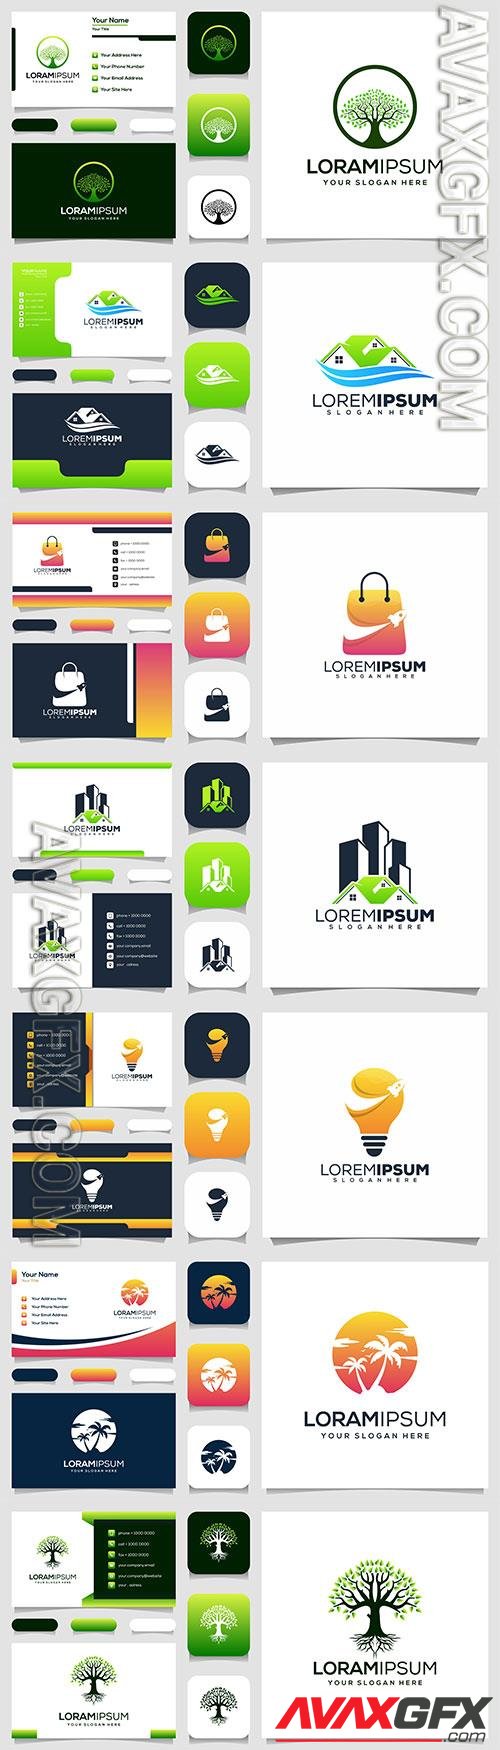 Modern logo and business card premium vector